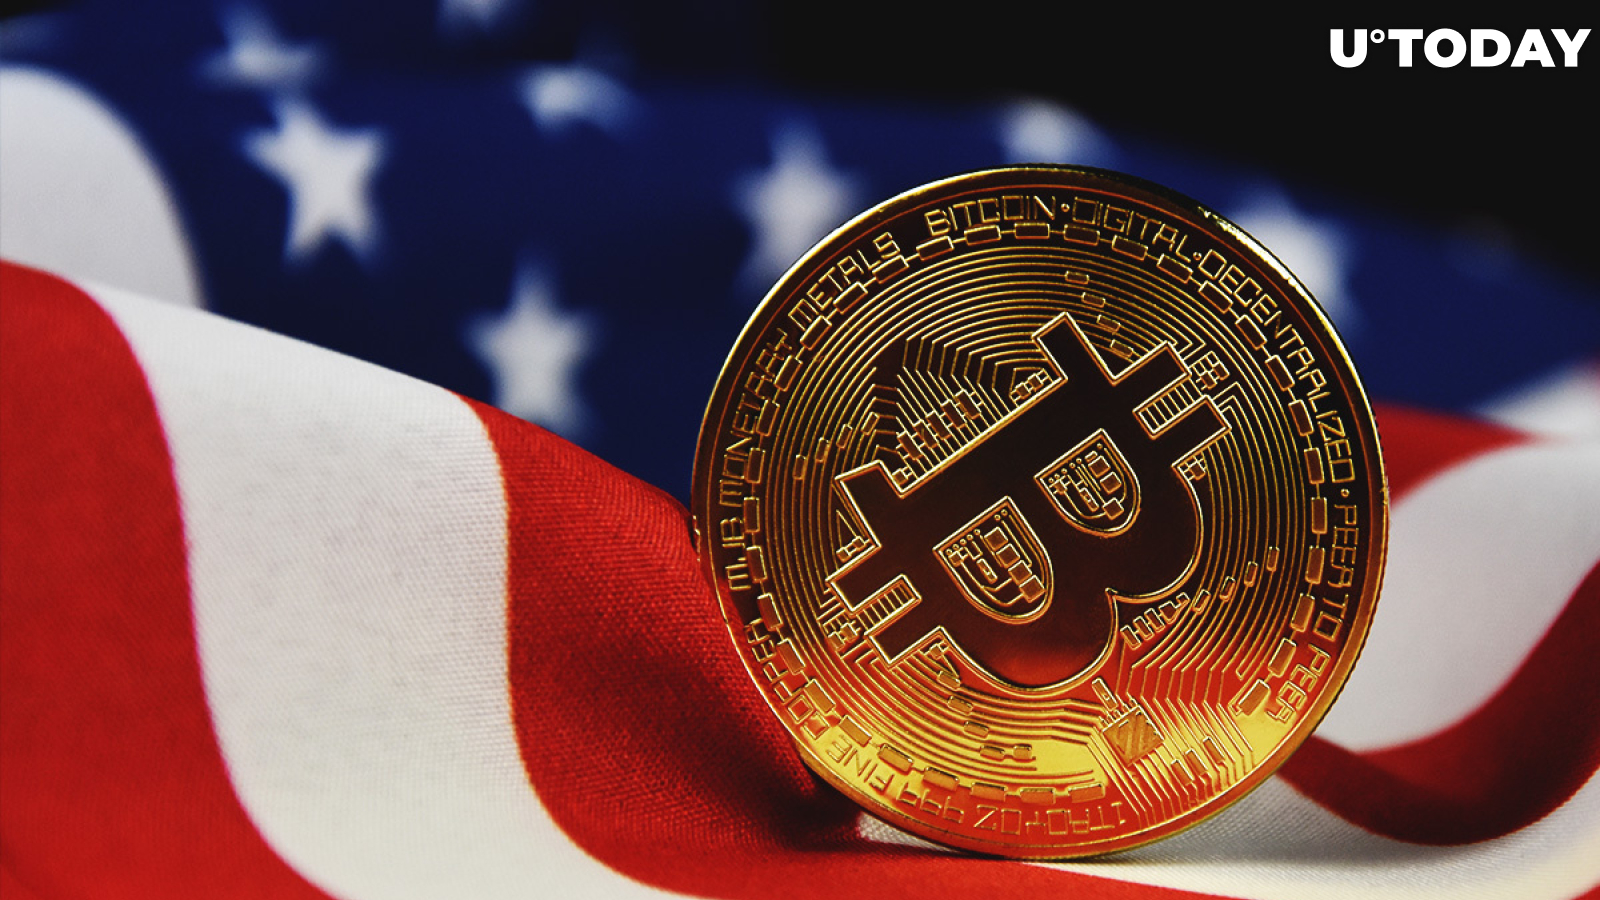 Trust in Bitcoin Tanks Among Americans: Morning Consult Survey